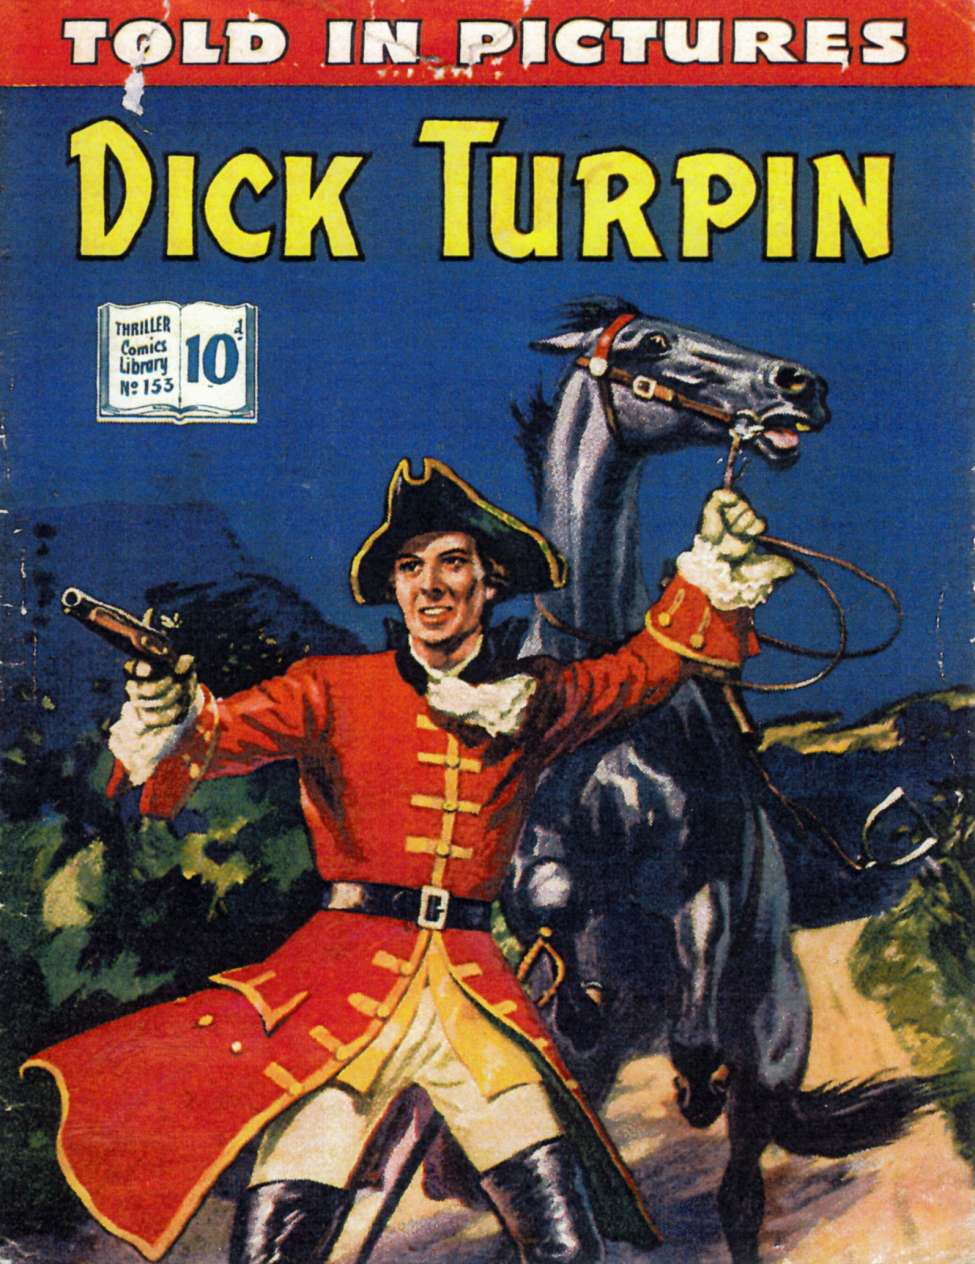 Comic Book Cover For Thriller Comics Library 153 - Dick Turpin